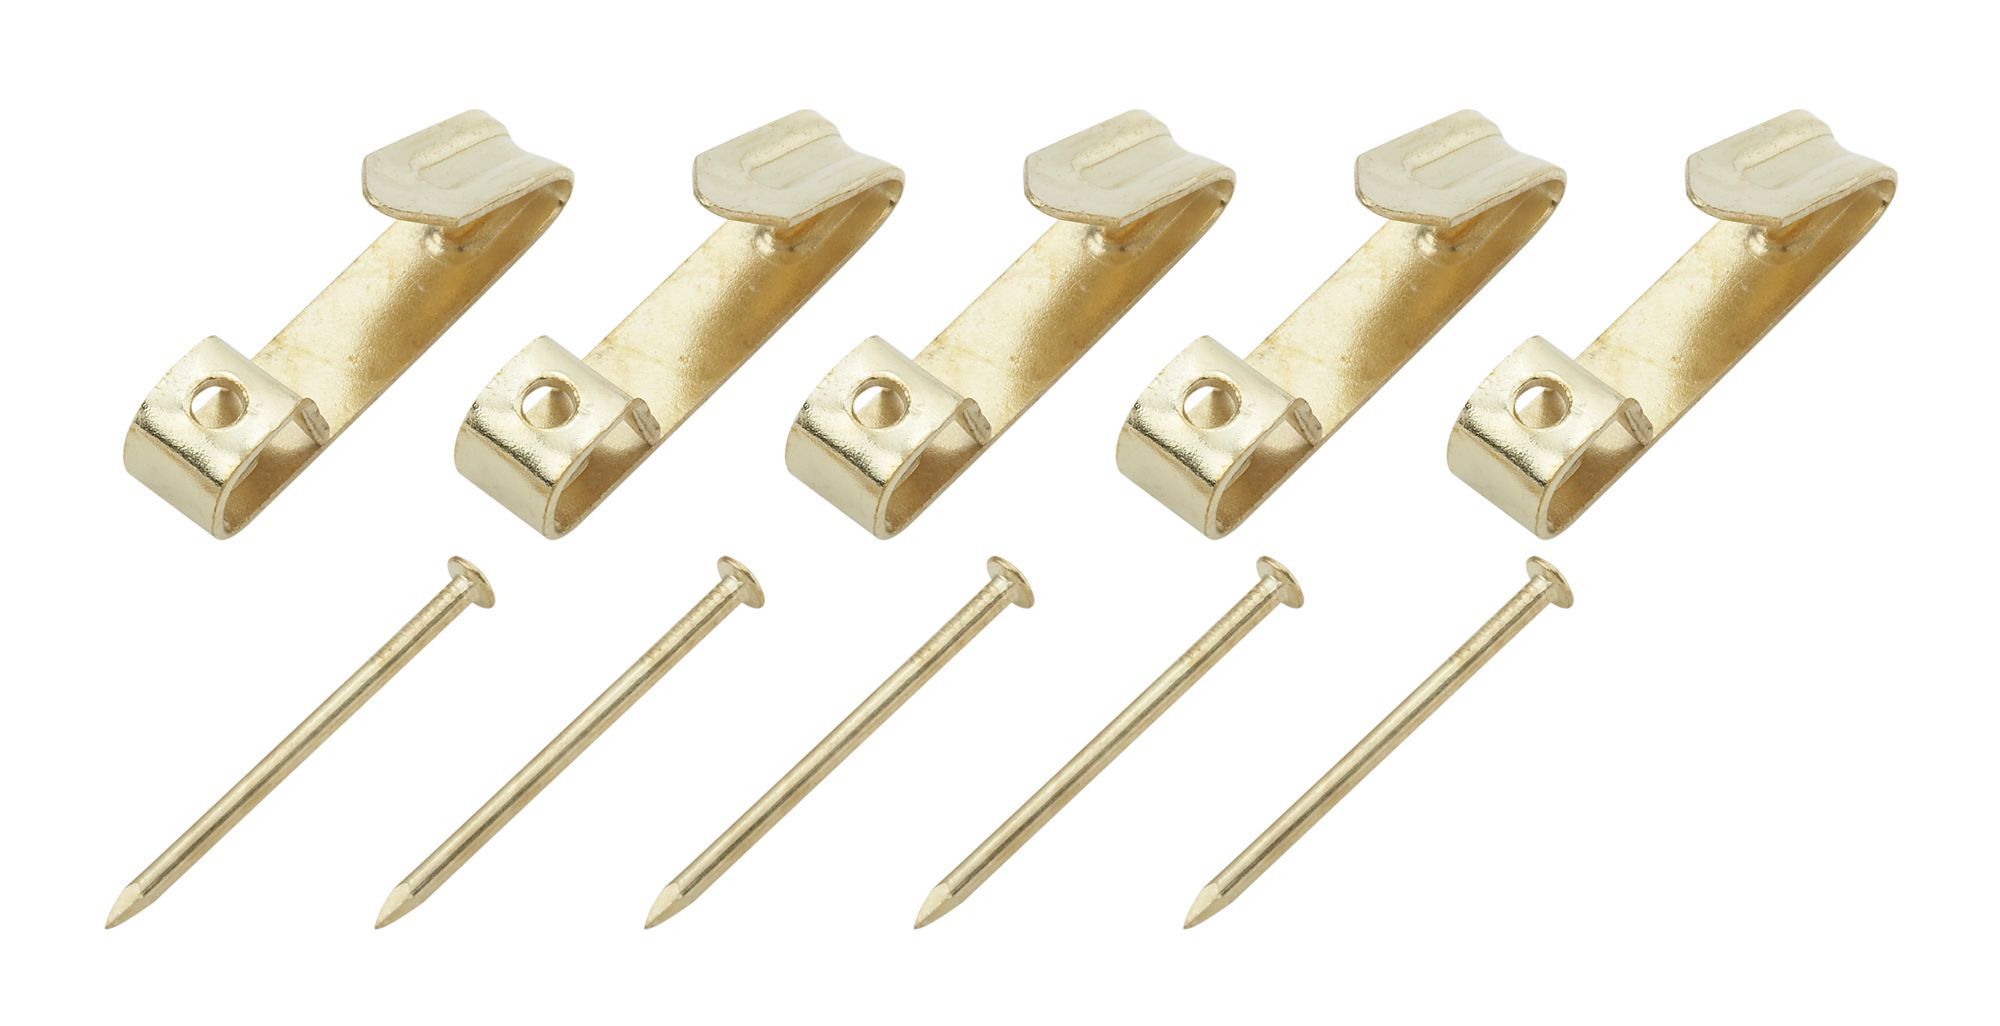 https://media.diy.com/is/image/Kingfisher/brass-plated-no-2-picture-hook-w-6mm-pack-of-25~03210451_07c?$MOB_PREV$&$width=618&$height=618